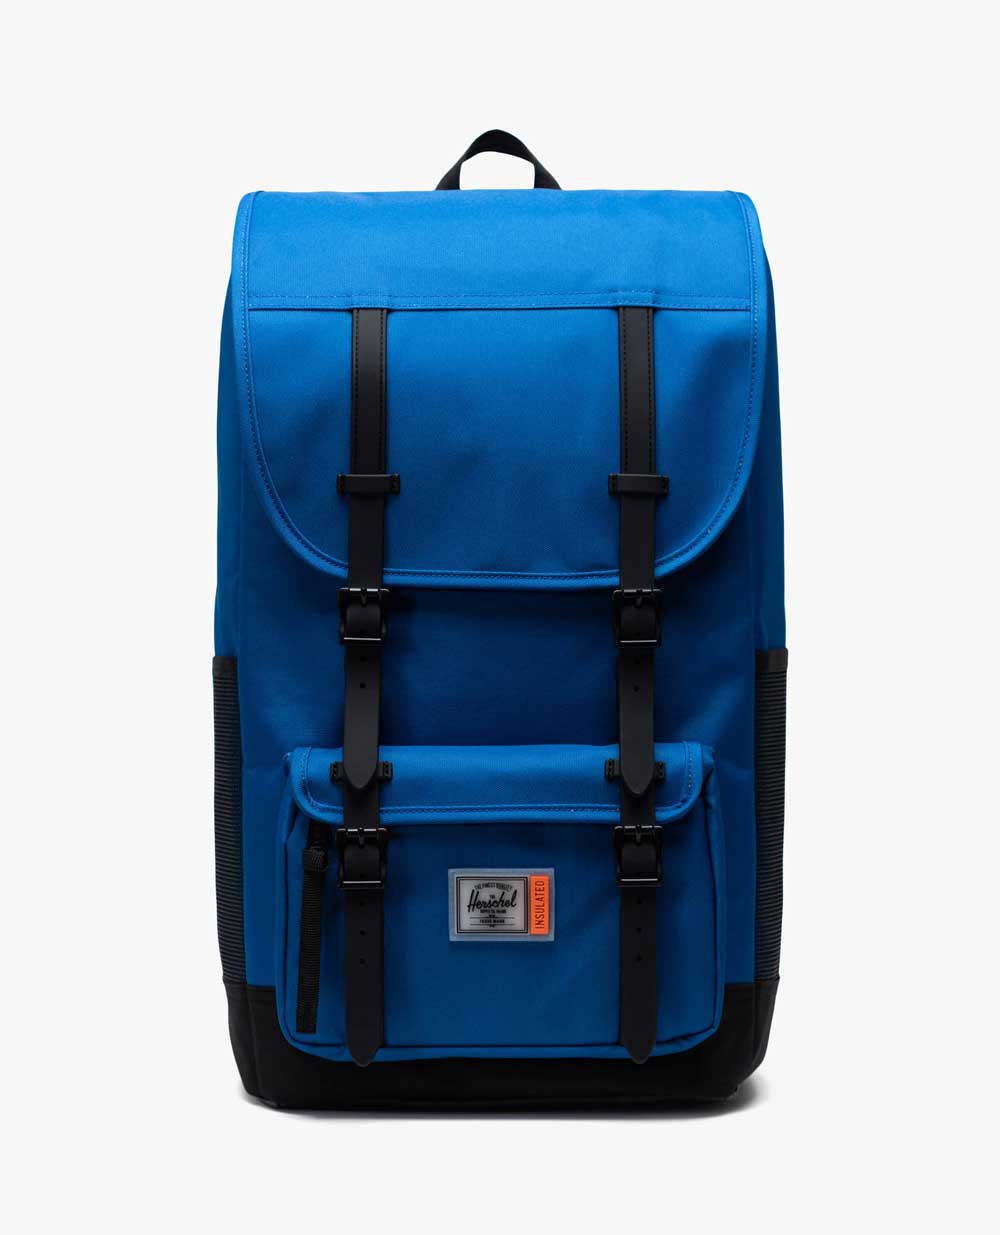 A link to the Insulated Backpacks section